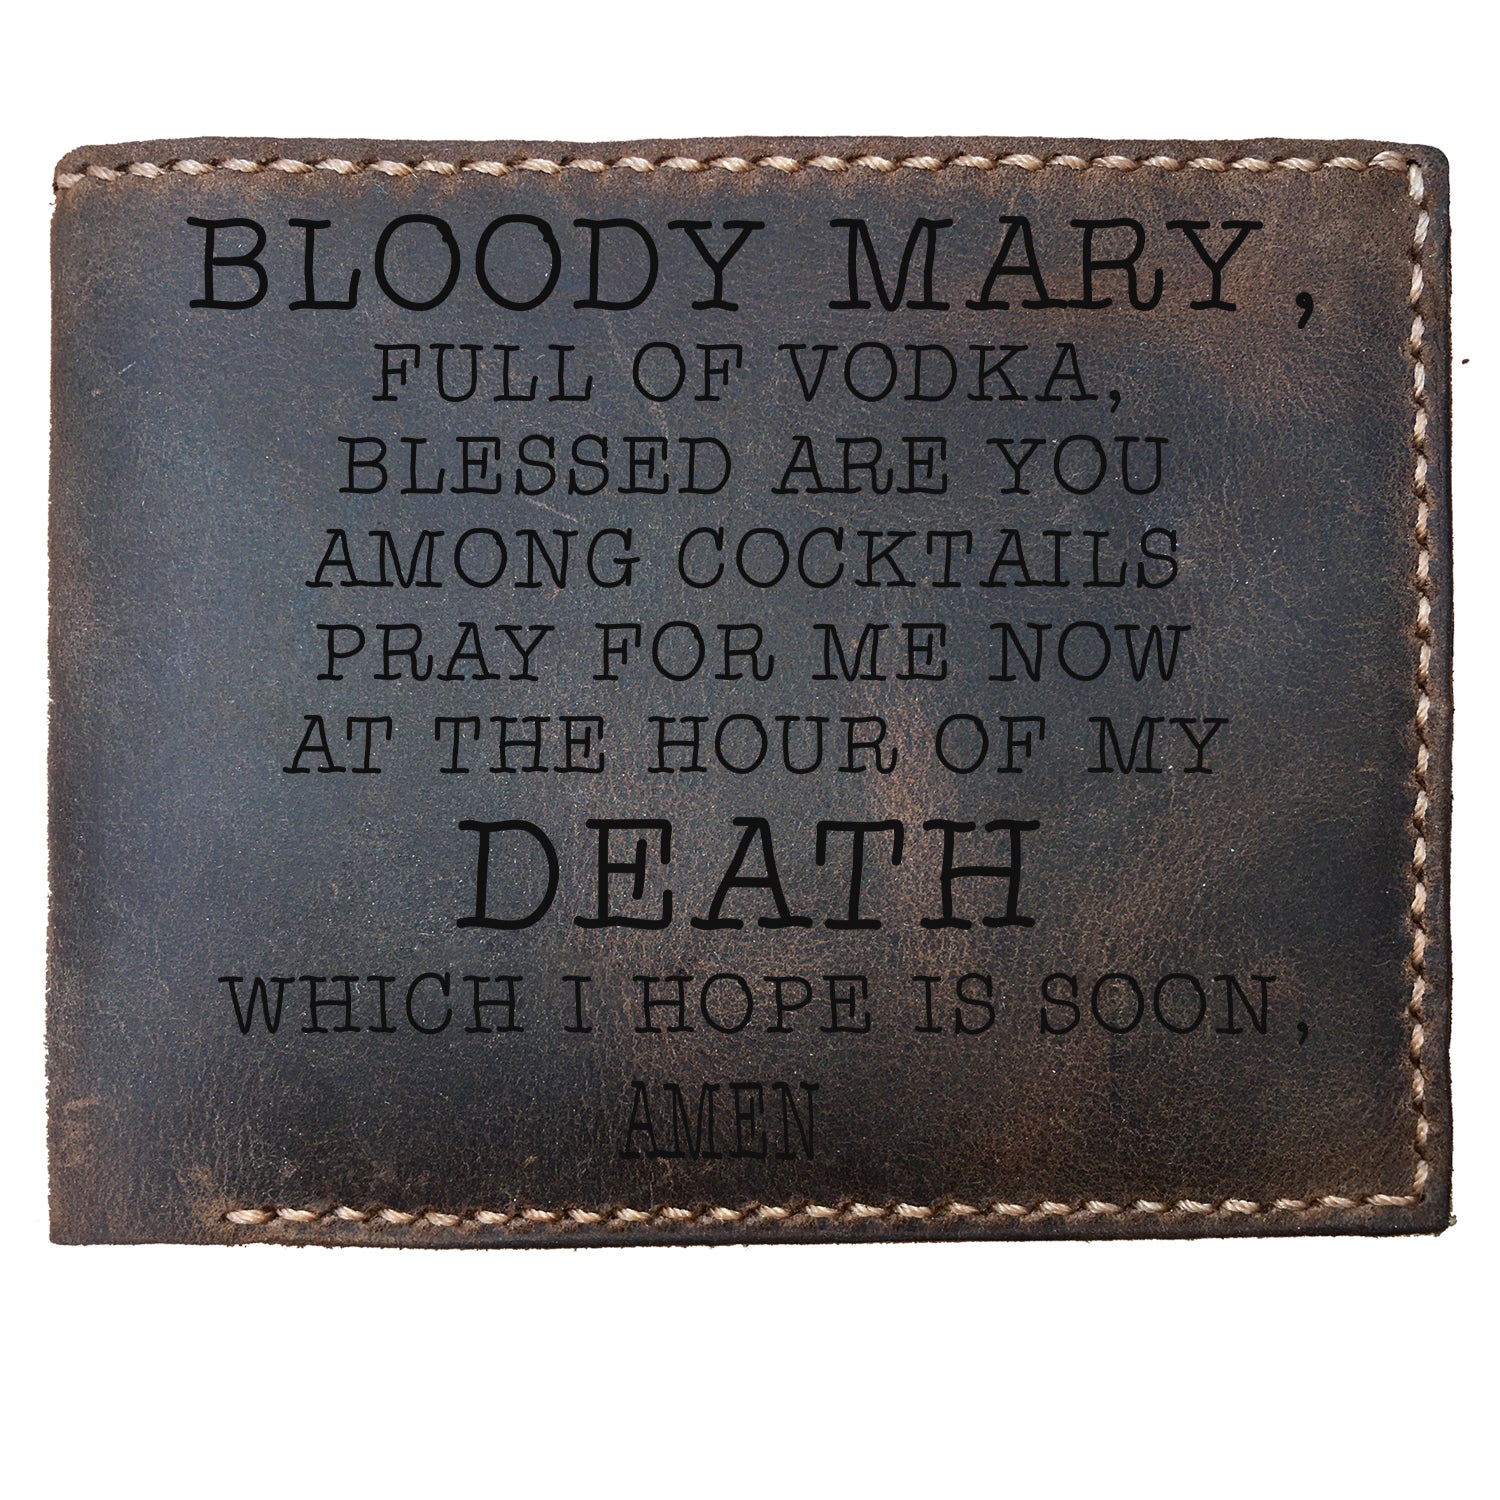 Funny Skitongifts Custom Laser Engraved Bifold Leather Wallet For Men, Bloody Mary Prayer- Vodka